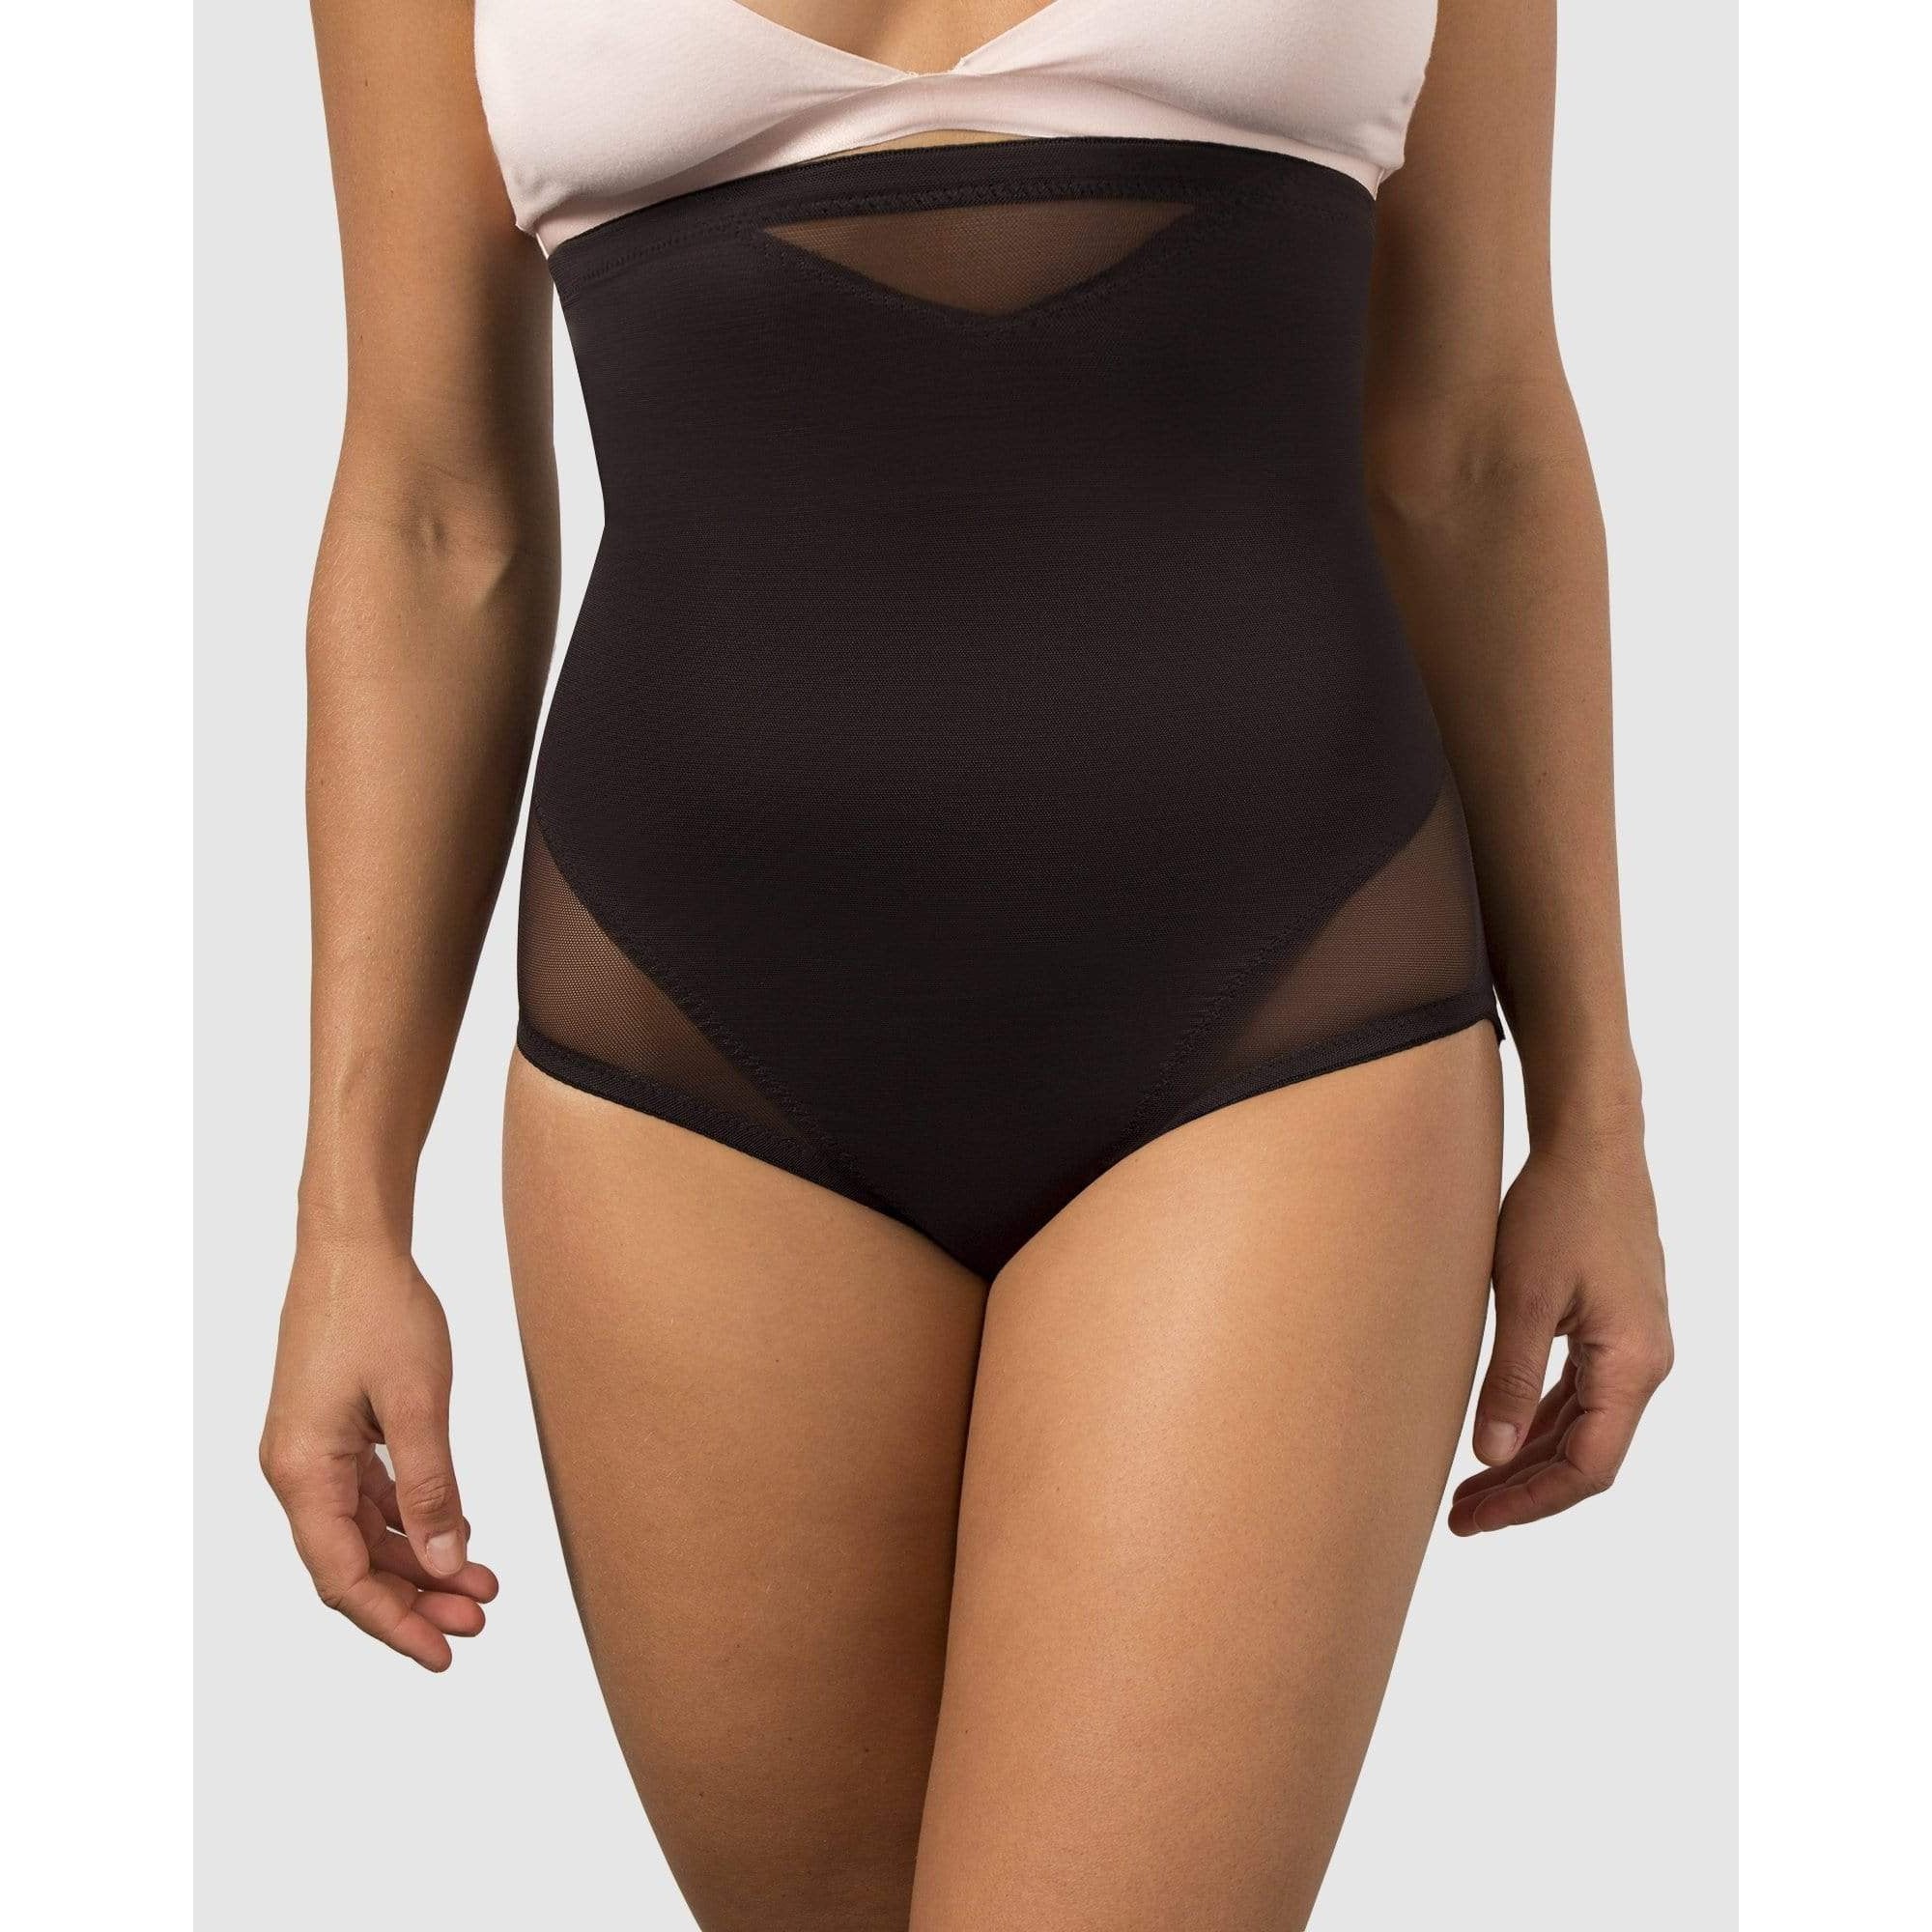 Miraclesuit Extra Firm Control Sheer Slip Shaper & Reviews